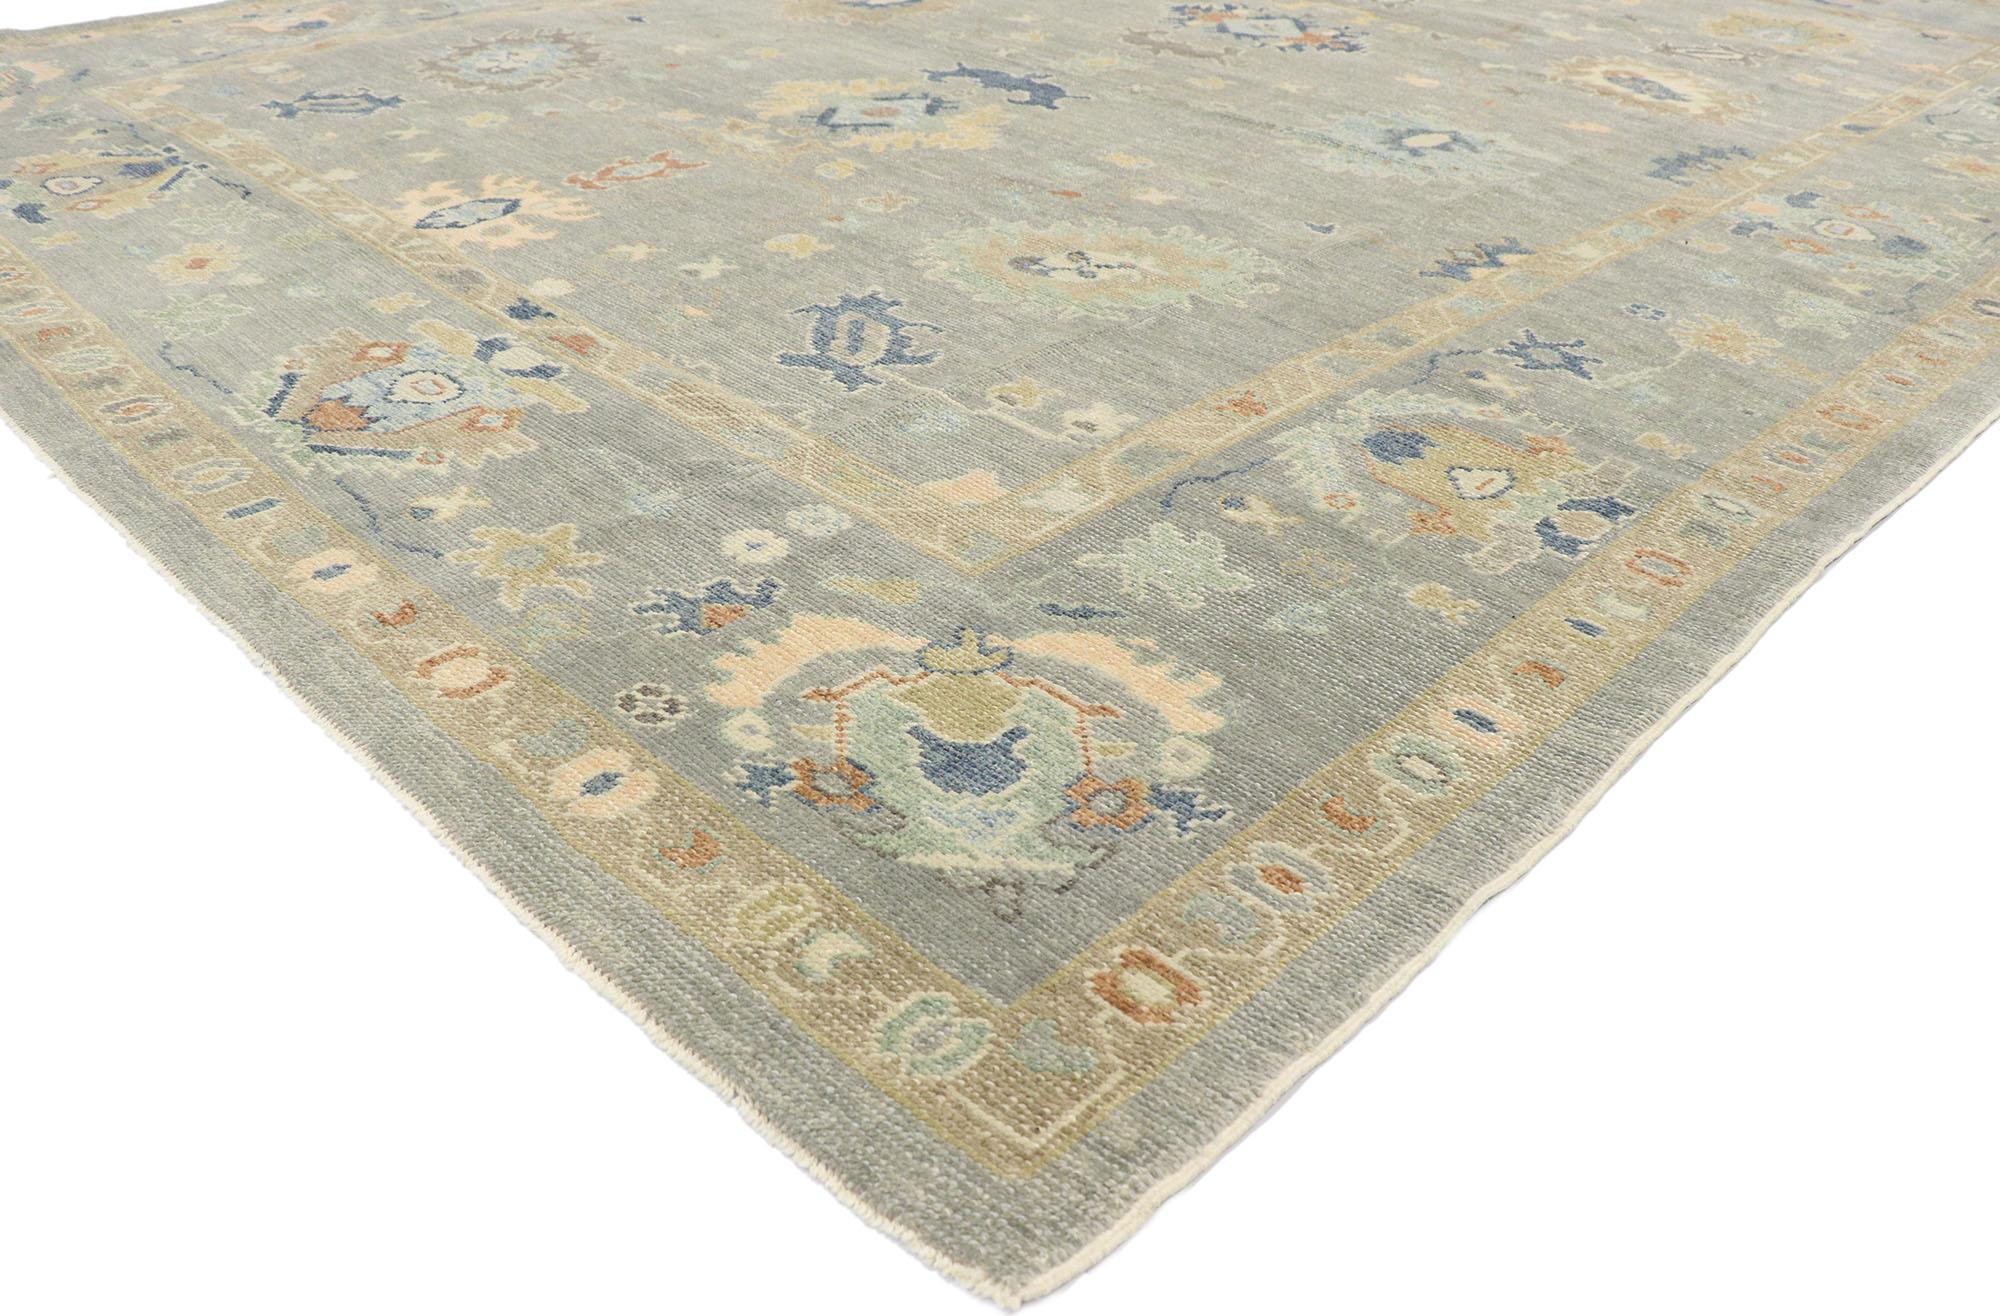 53495, new contemporary gray Turkish Oushak rug with modern coastal cottage style. Polished and playful with soft colors, this hand-knotted wool contemporary Turkish Oushak rug features an all-over botanical pattern spread across an abrashed dove